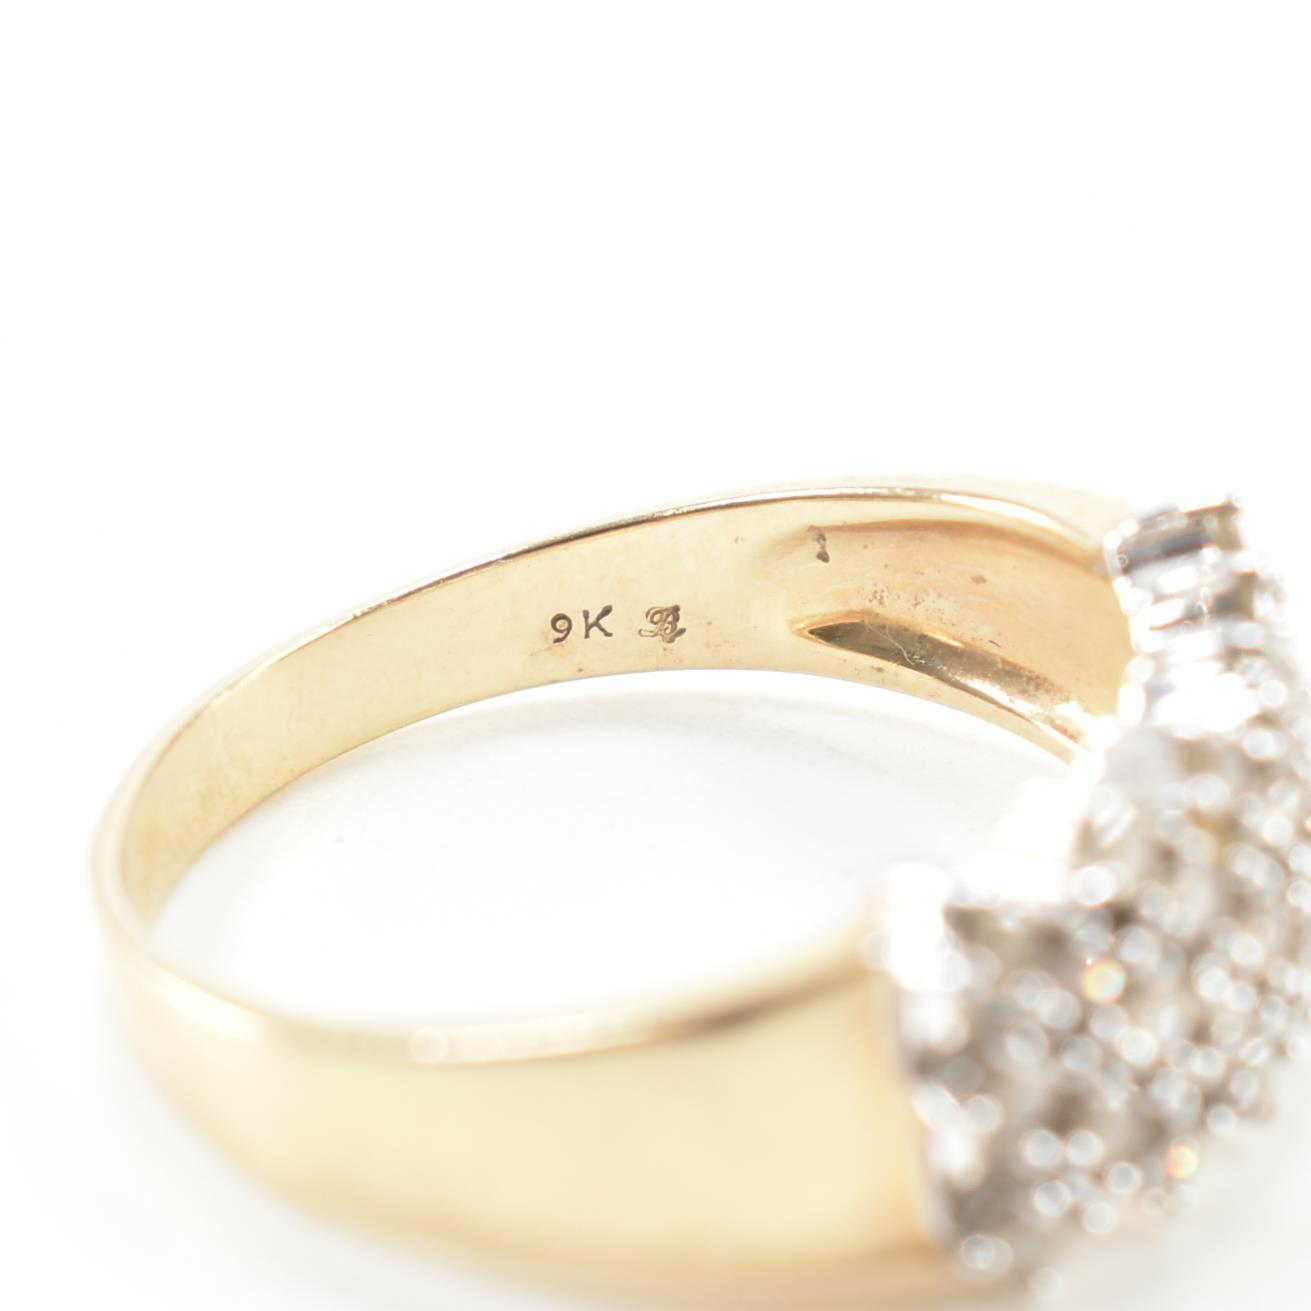 HALLMARKED 9CT GOLD & DIAMOND CLUSTER RING - Image 8 of 9